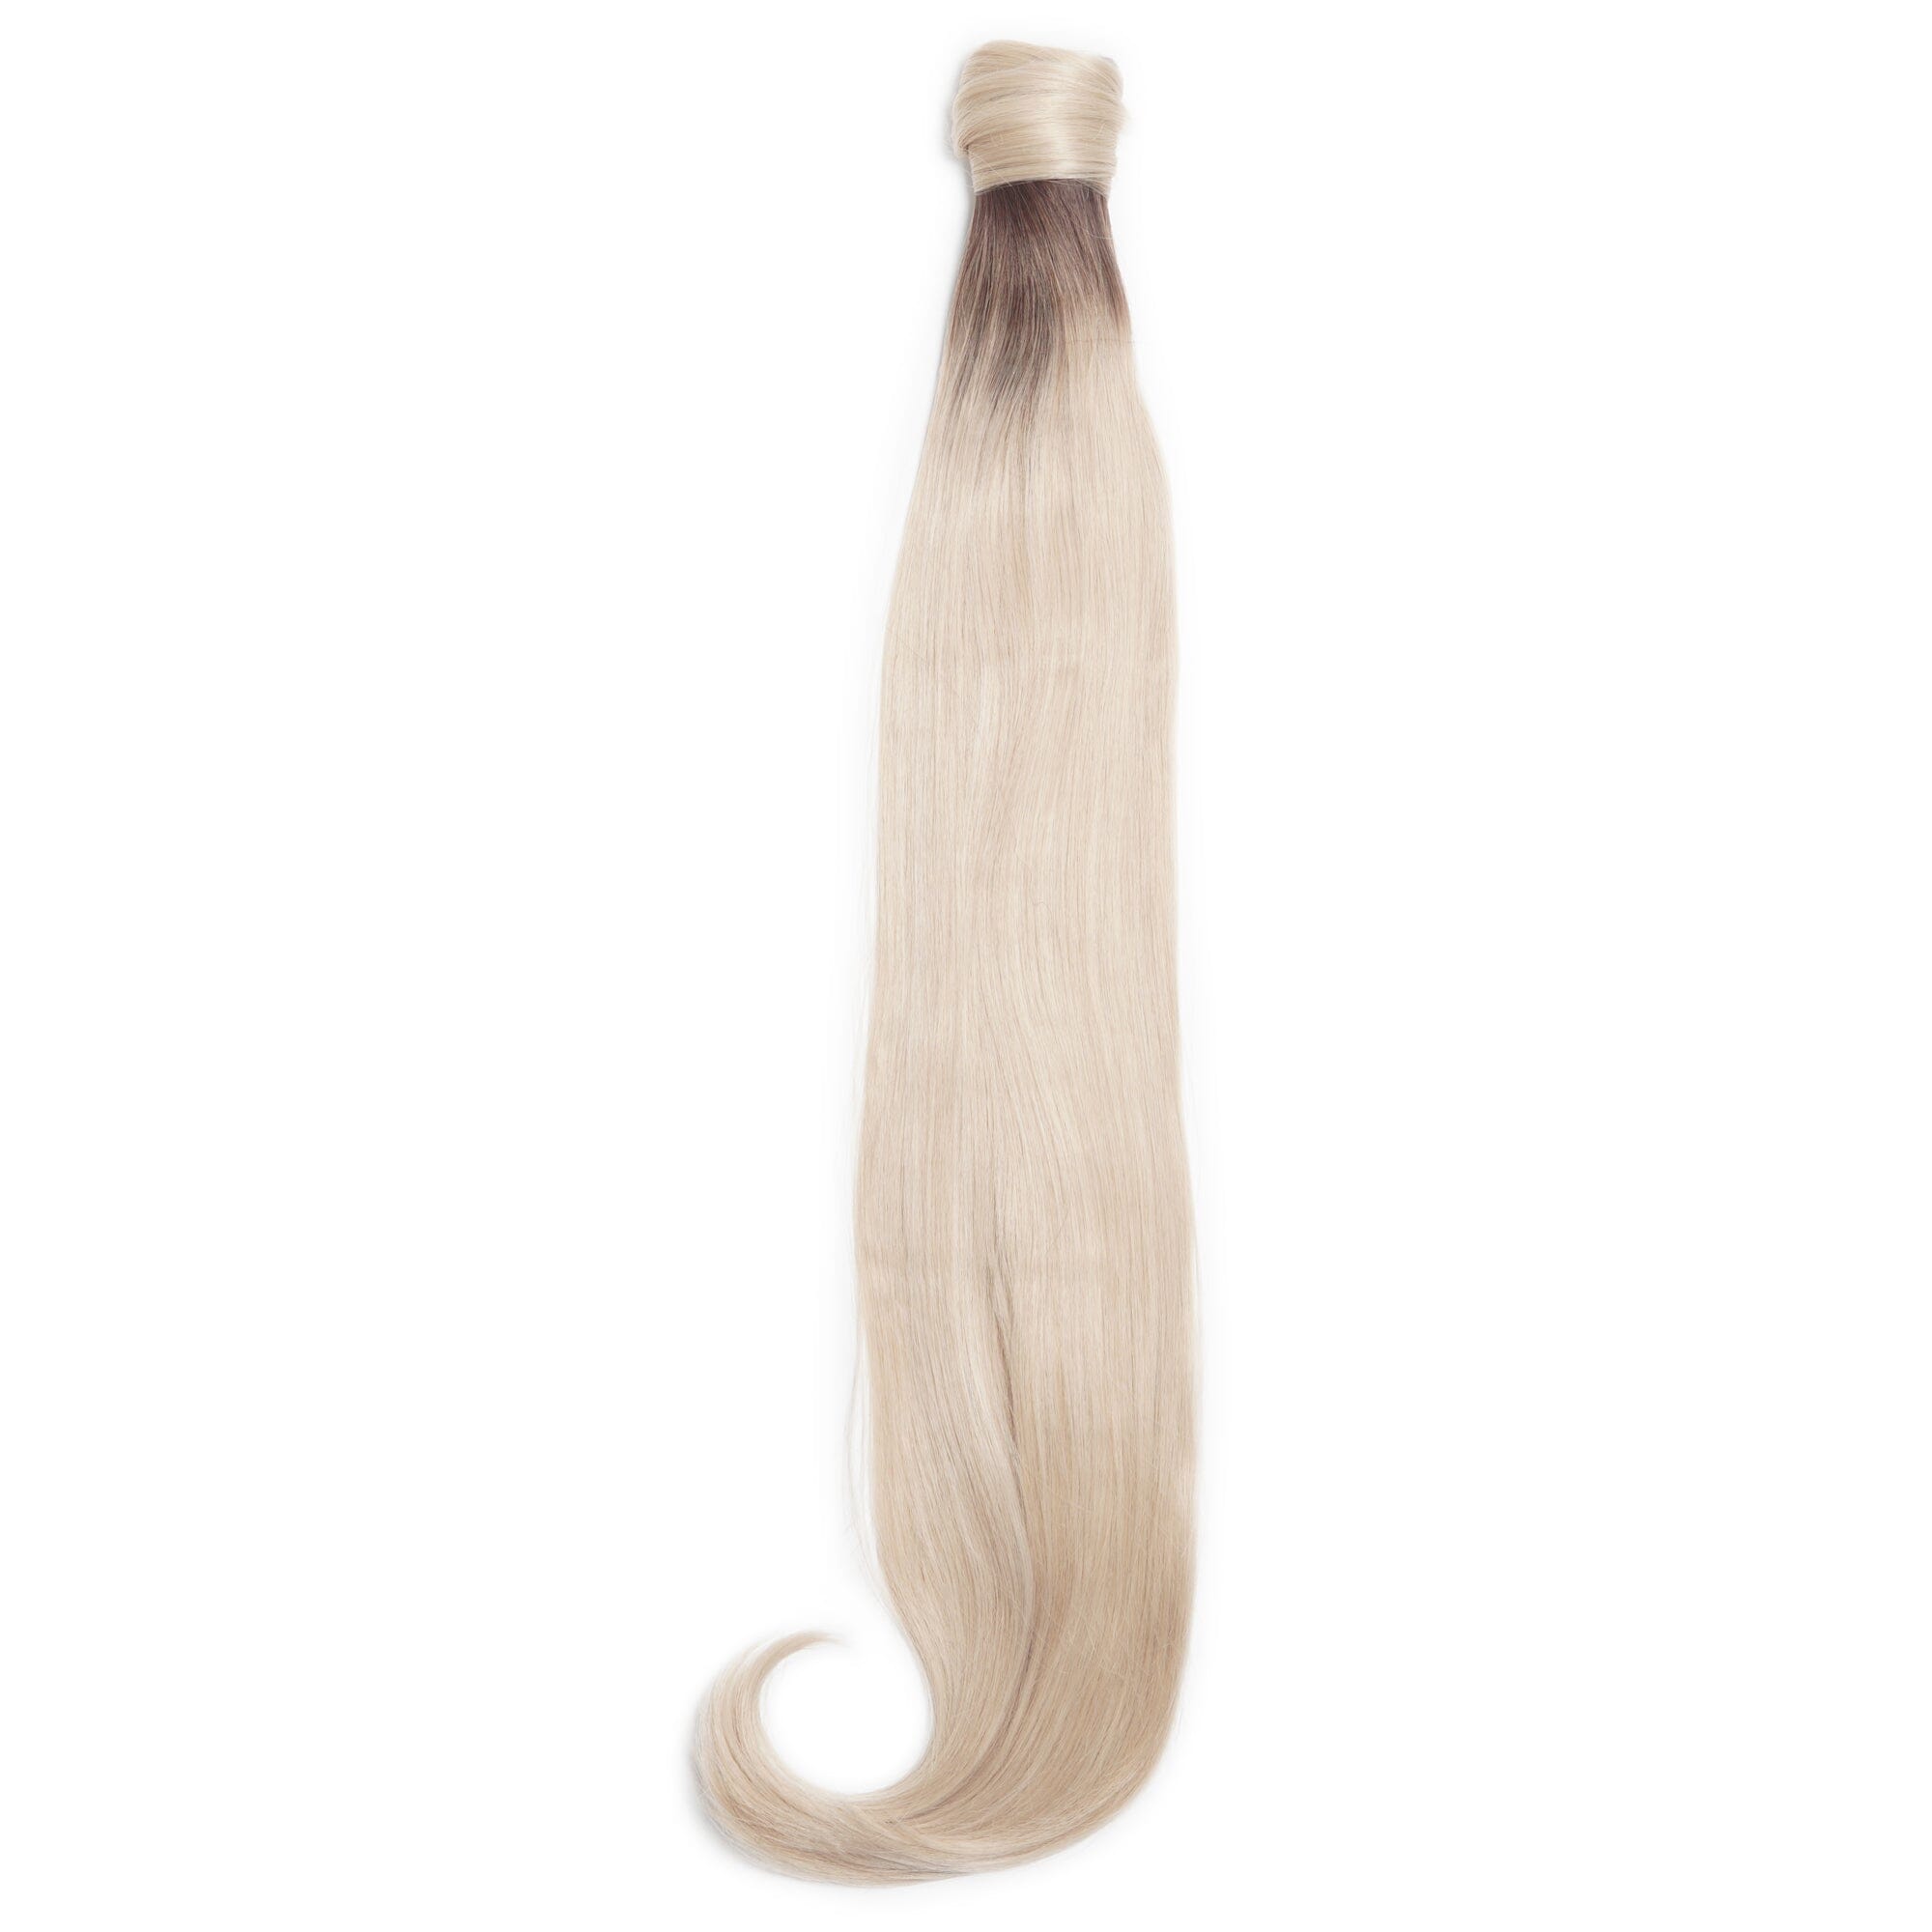 Long Clip-In Ponytails (22" - 30") Clip In Ponytail Easilocks 26" Silky Straight Bouncy Ponytail Rooted Blonde 